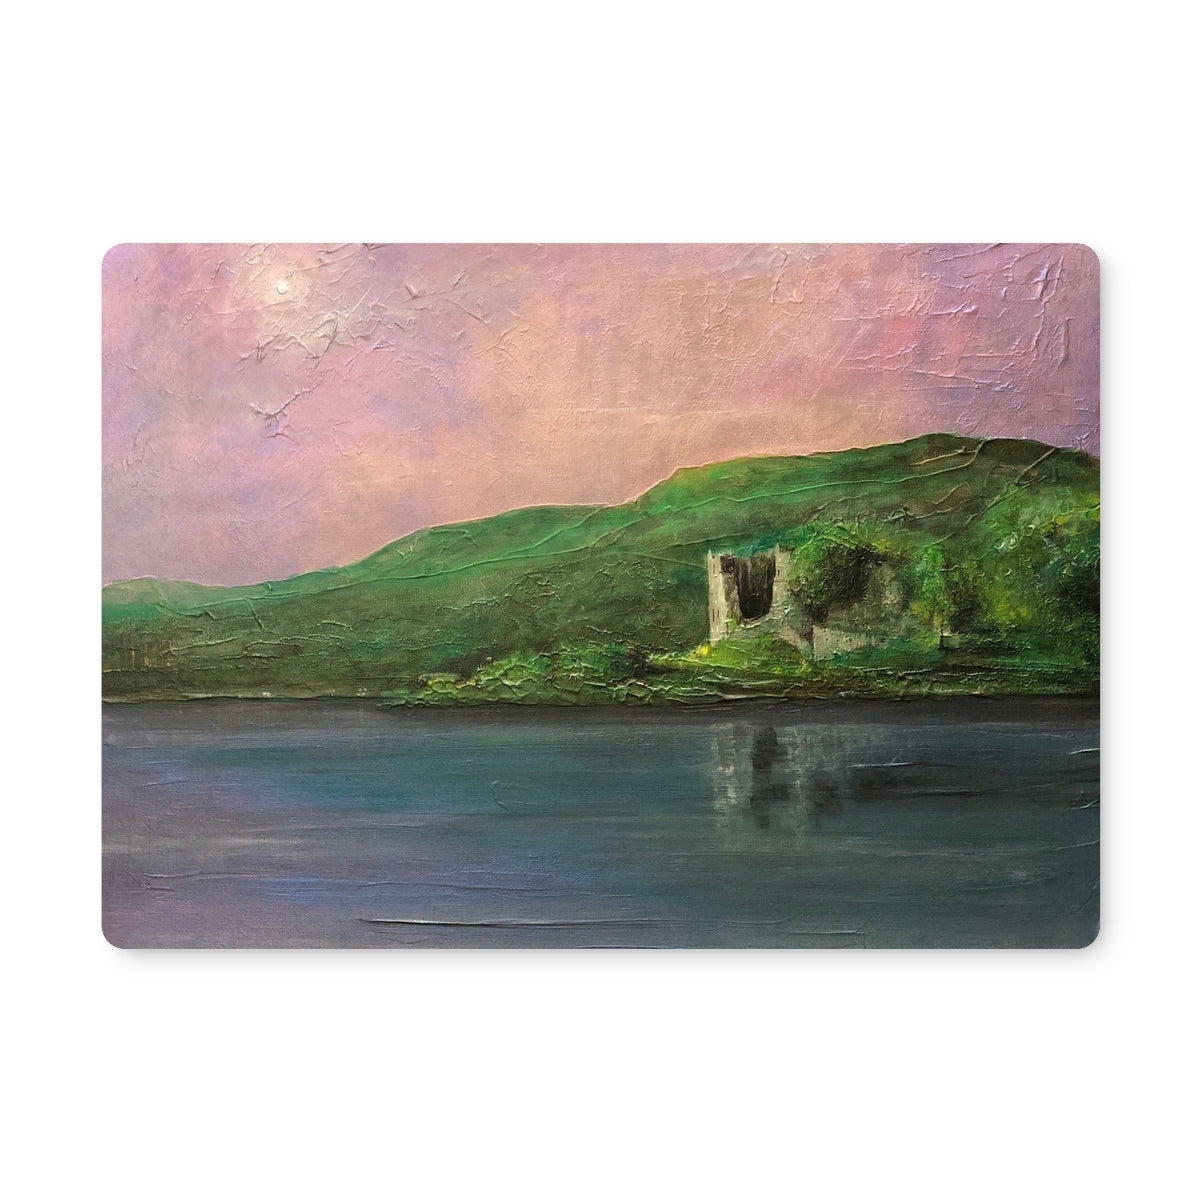 Old Castle Lachlan Art Gifts Placemat-Homeware-Prodigi-Single Placemat-Paintings, Prints, Homeware, Art Gifts From Scotland By Scottish Artist Kevin Hunter